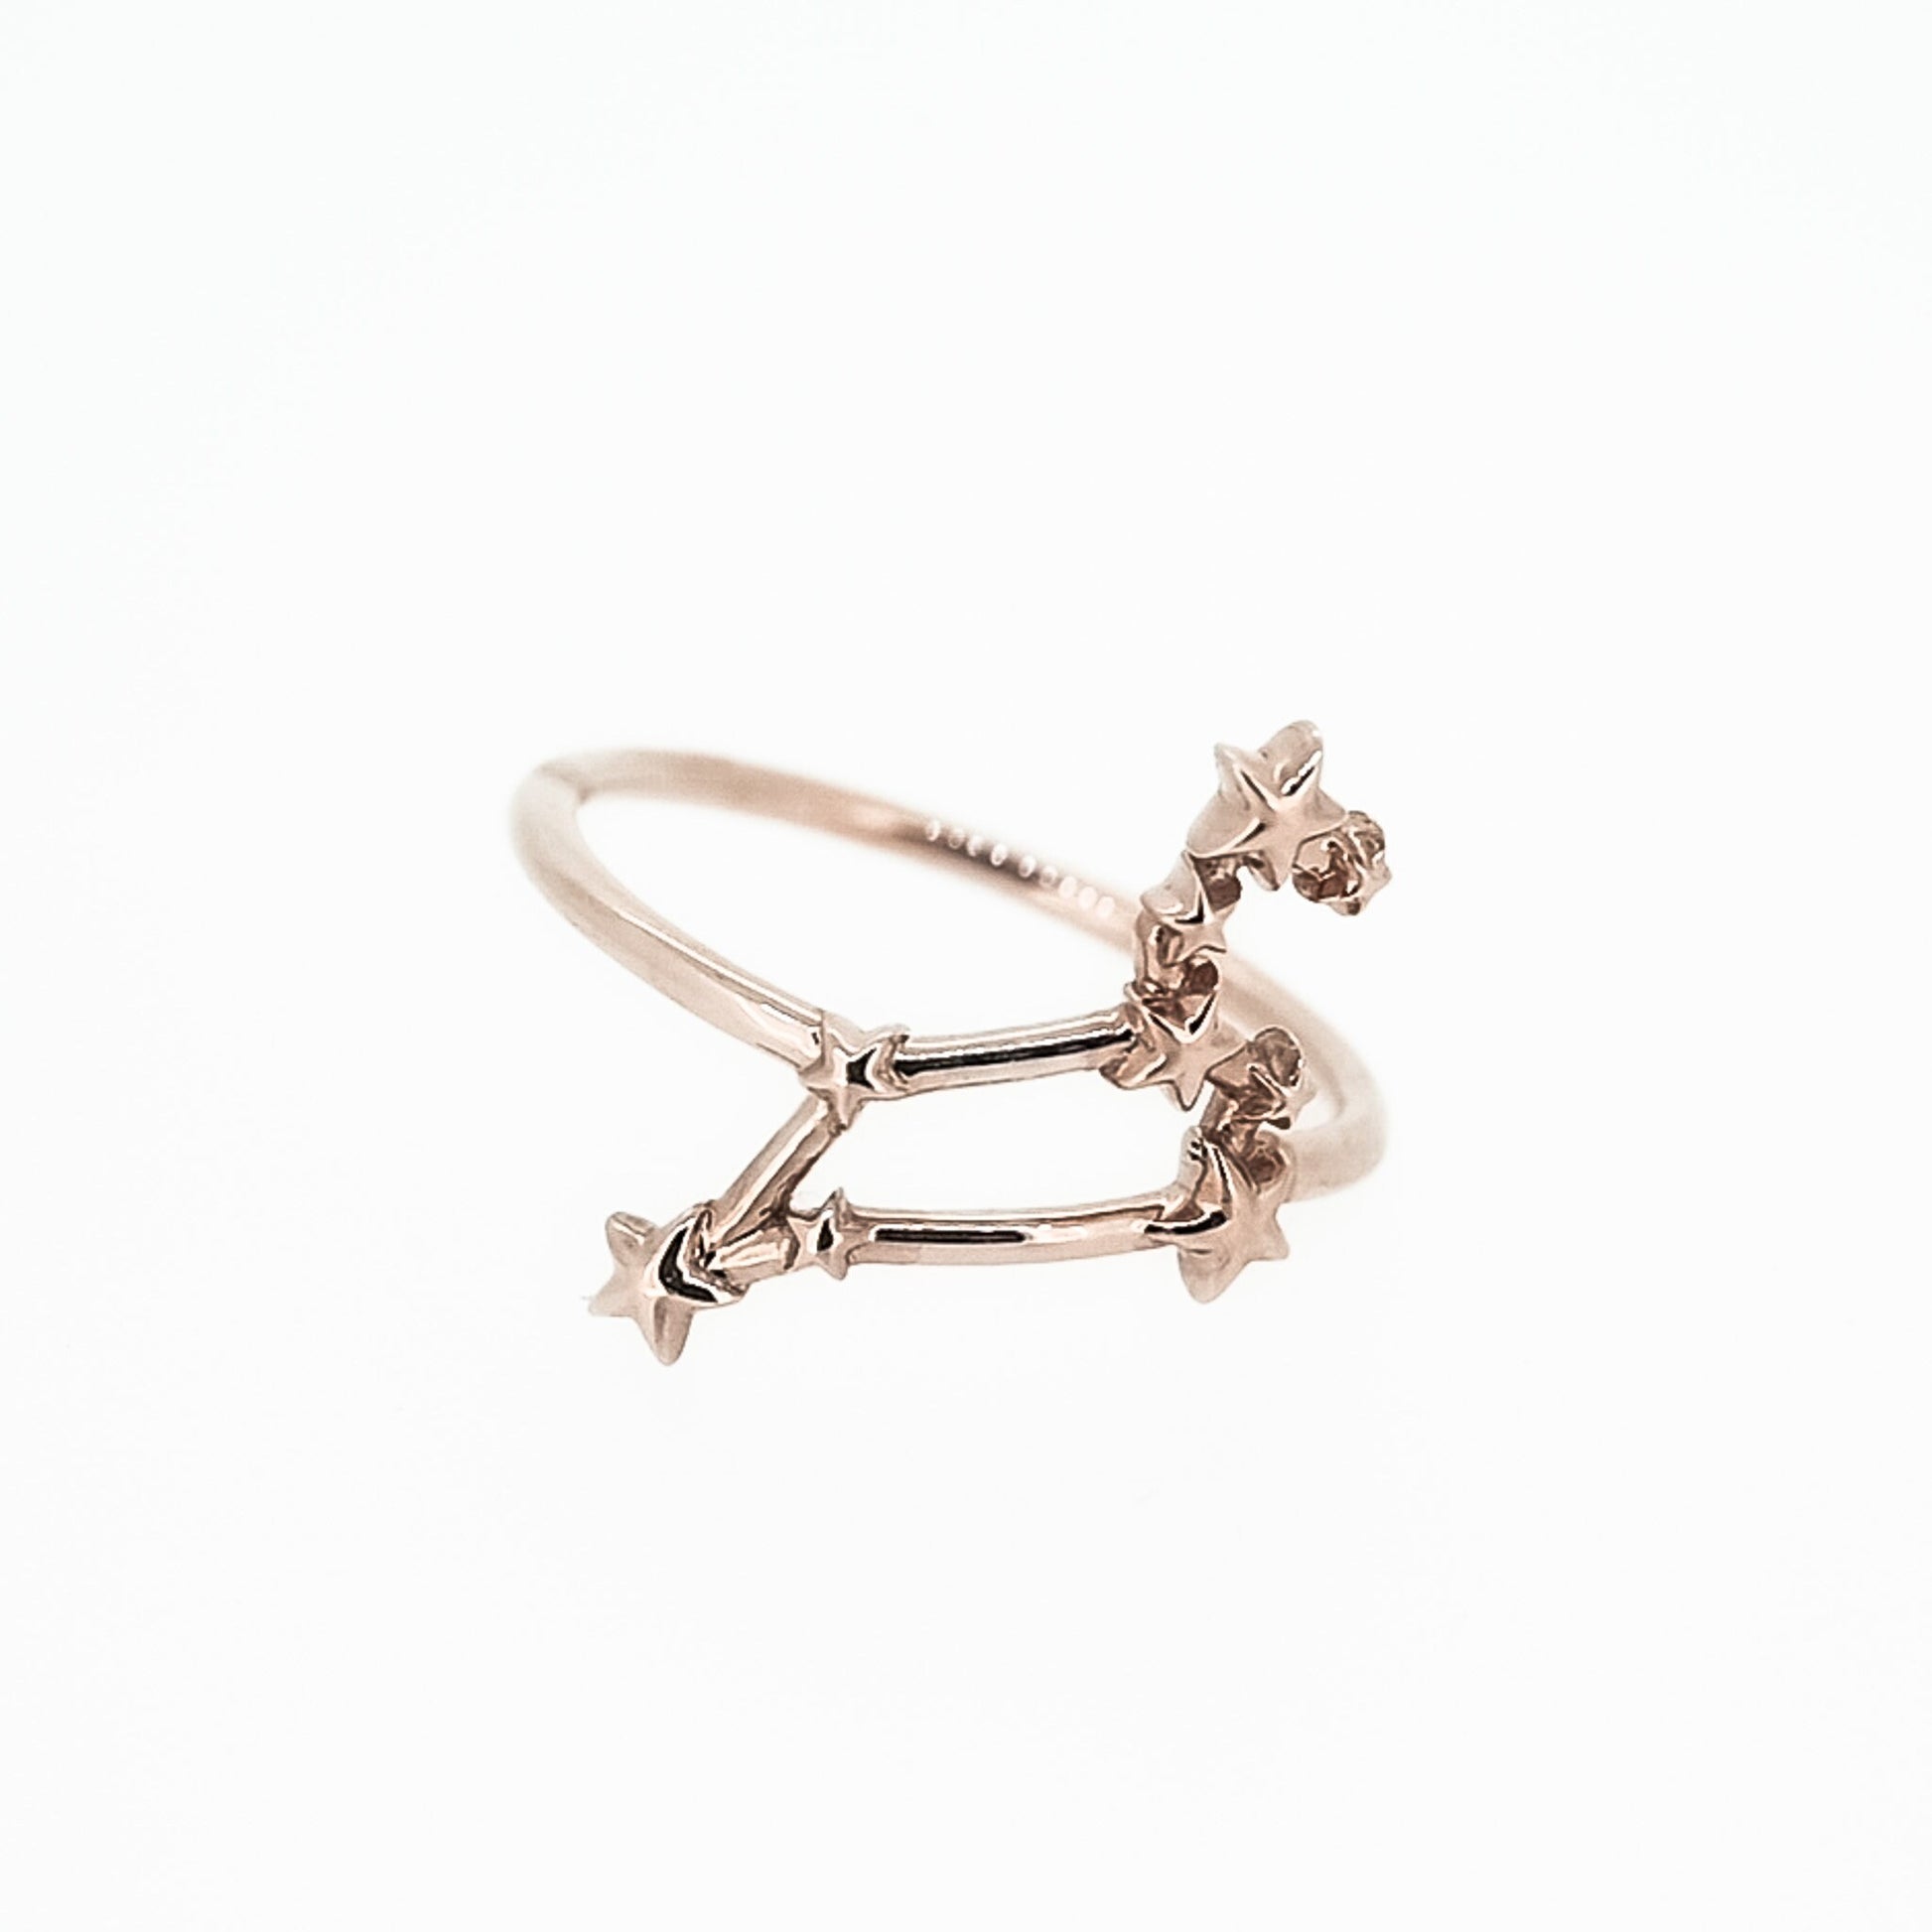 Solid Gold Leo Star Sign Dainty Celestial Zodiac Ring in solid 14K Yellow Gold, 14k White Gold, 14K Rose Gold